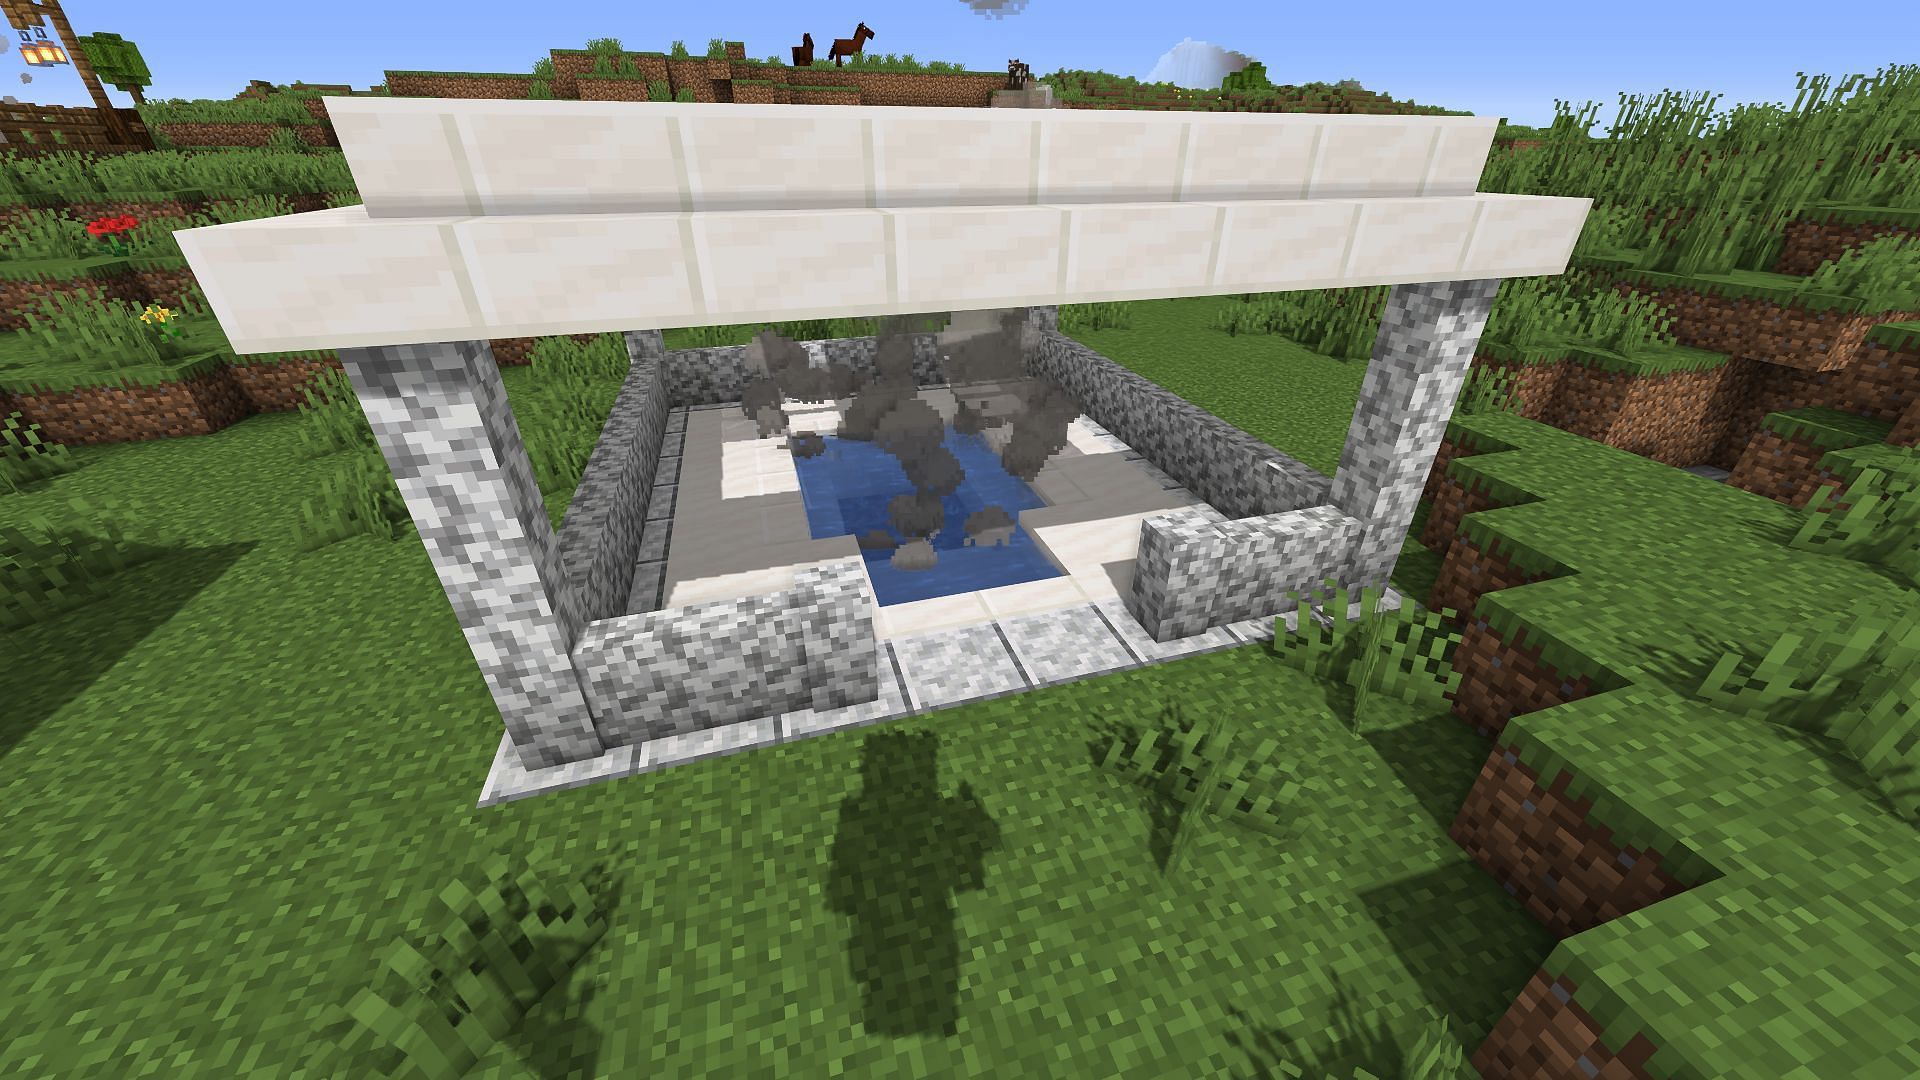 An example of a simple in-ground hot tub (Image via Minecraft)